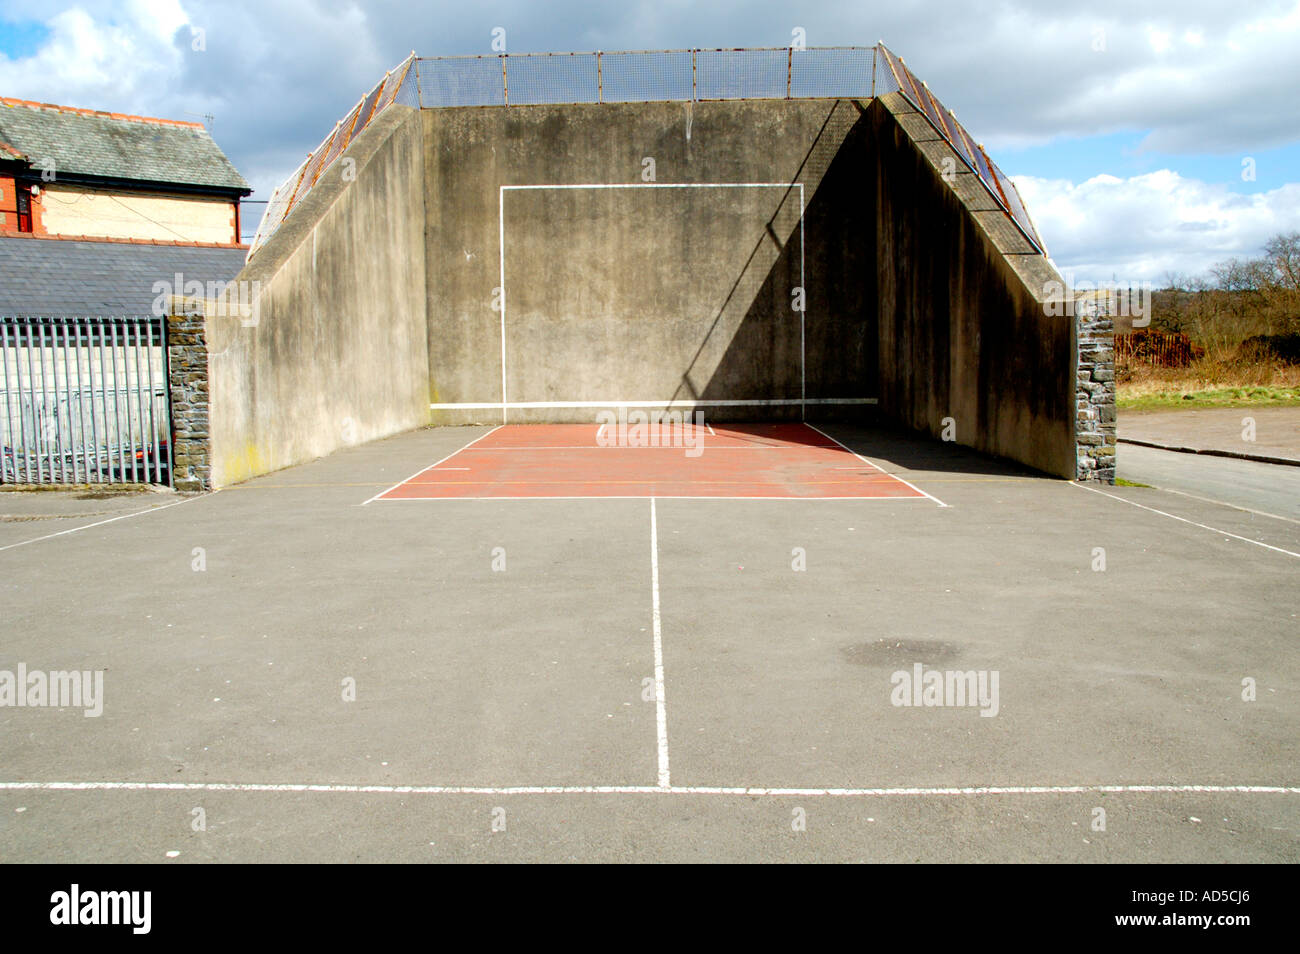 Historic Handball Court In Village Of Nelson Near Caerphilly In The AD5CJ6 